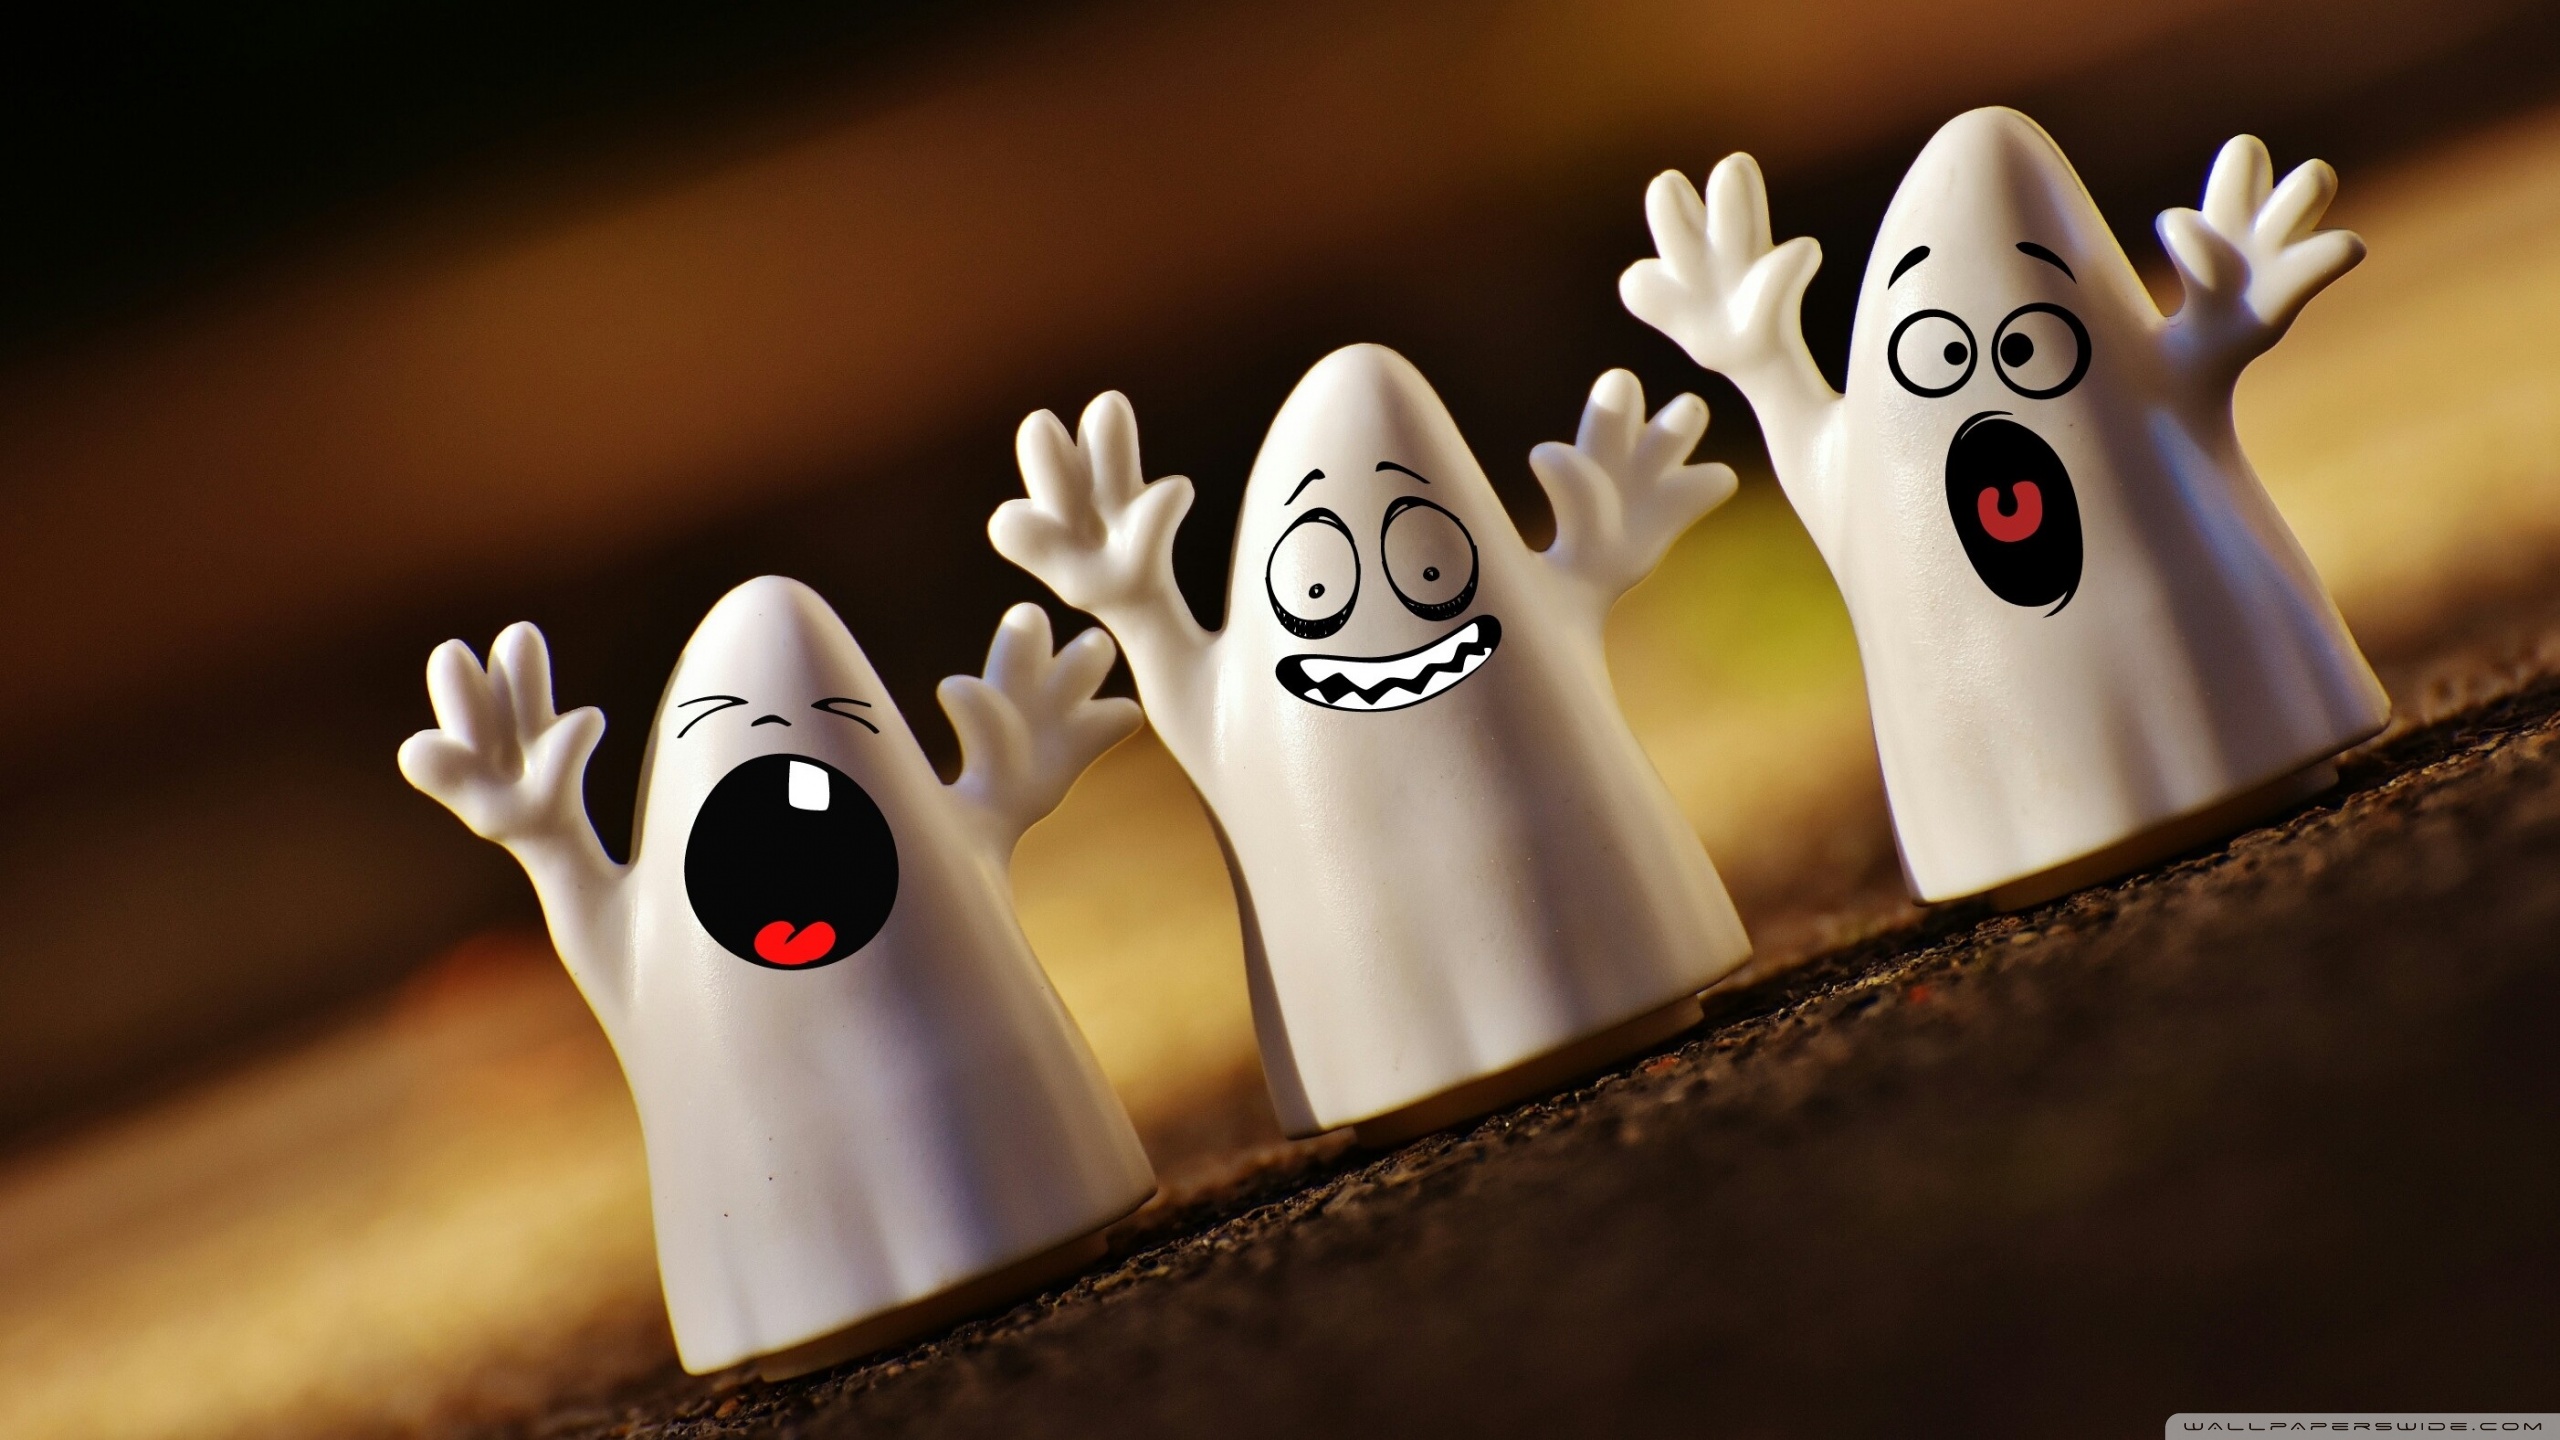 Halloween Ghost Cute Wallpaper Background Halloween Ghost Wallpaper  Background Image And Wallpaper for Free Download